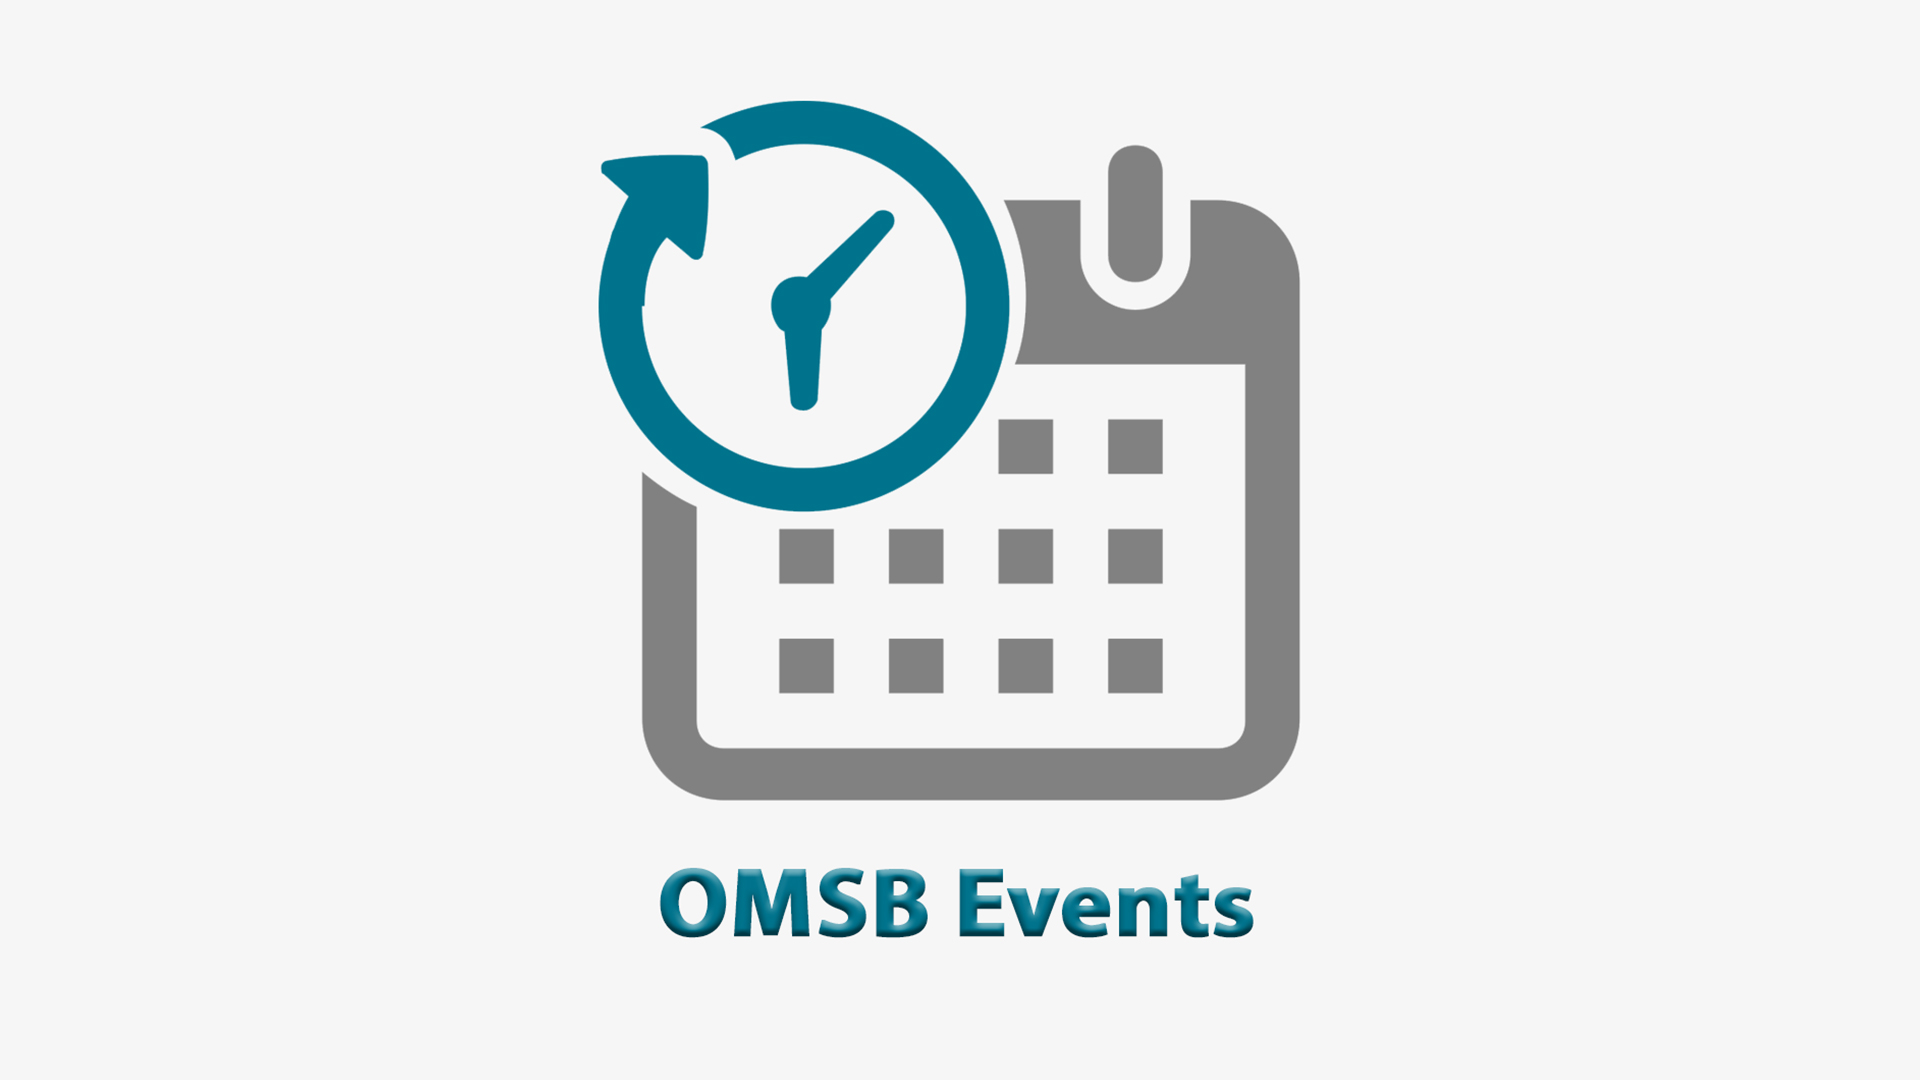 OMSB Events